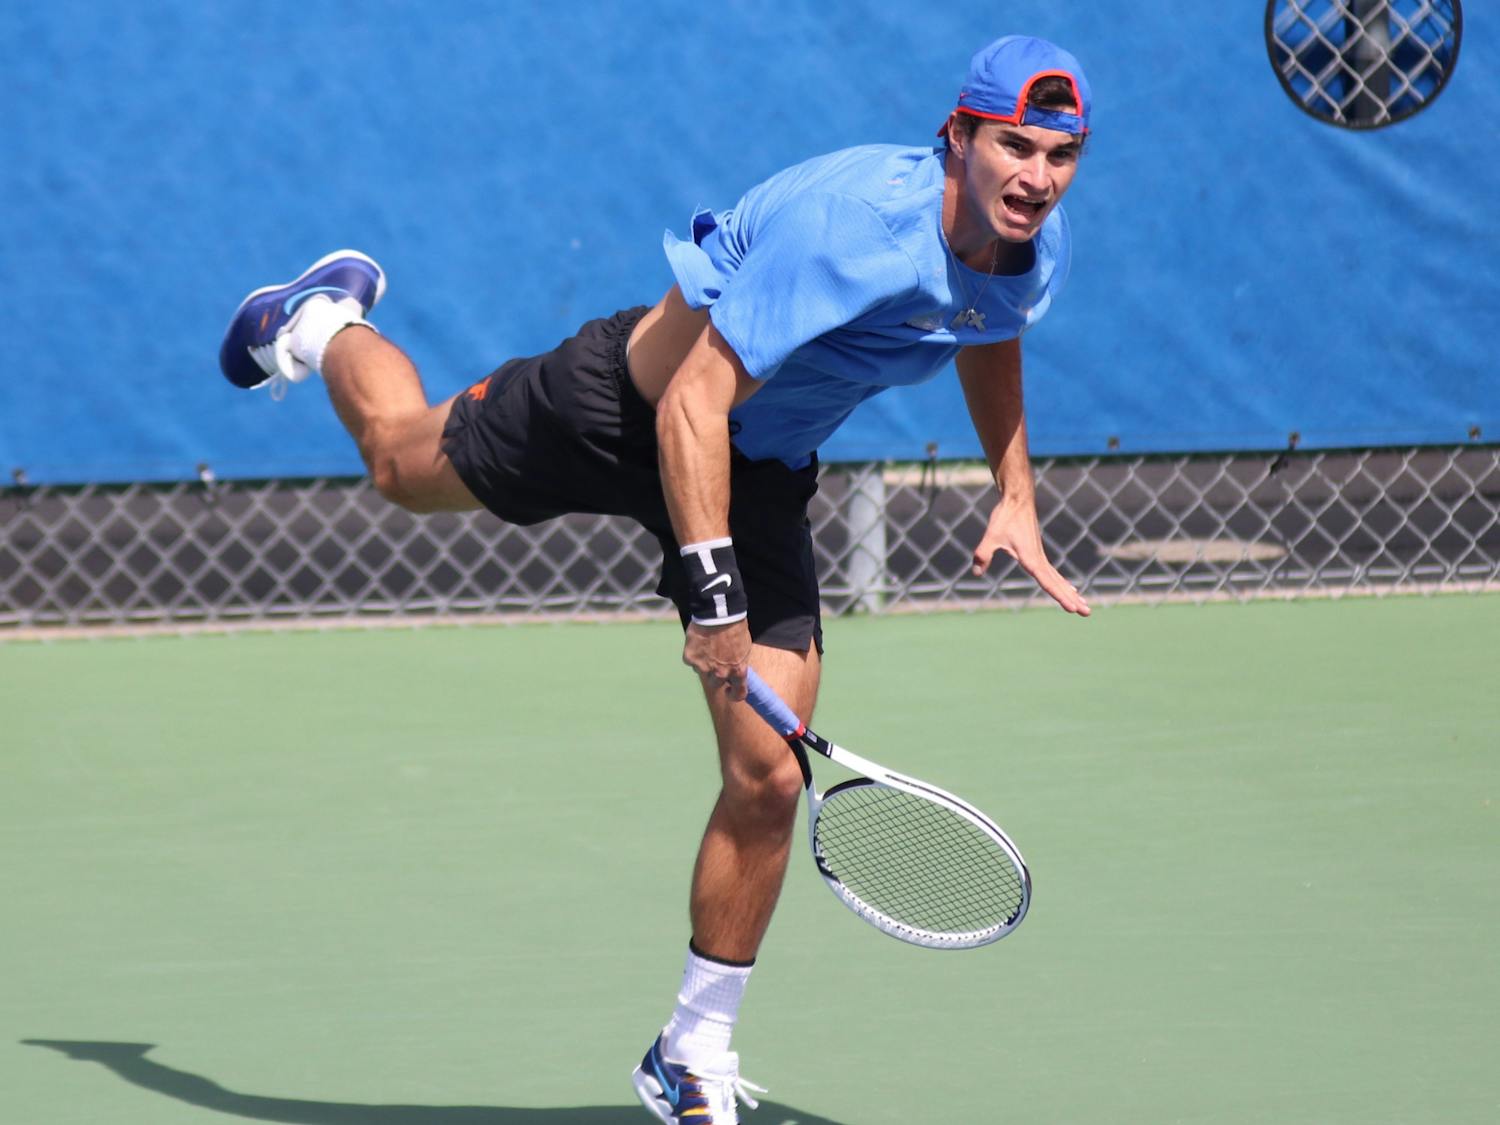 Captain Duarte Vale follows through a serve against Auburn on February 21. Vale and the Gators were named the No. 1 seed in the country ahead of Regionals.